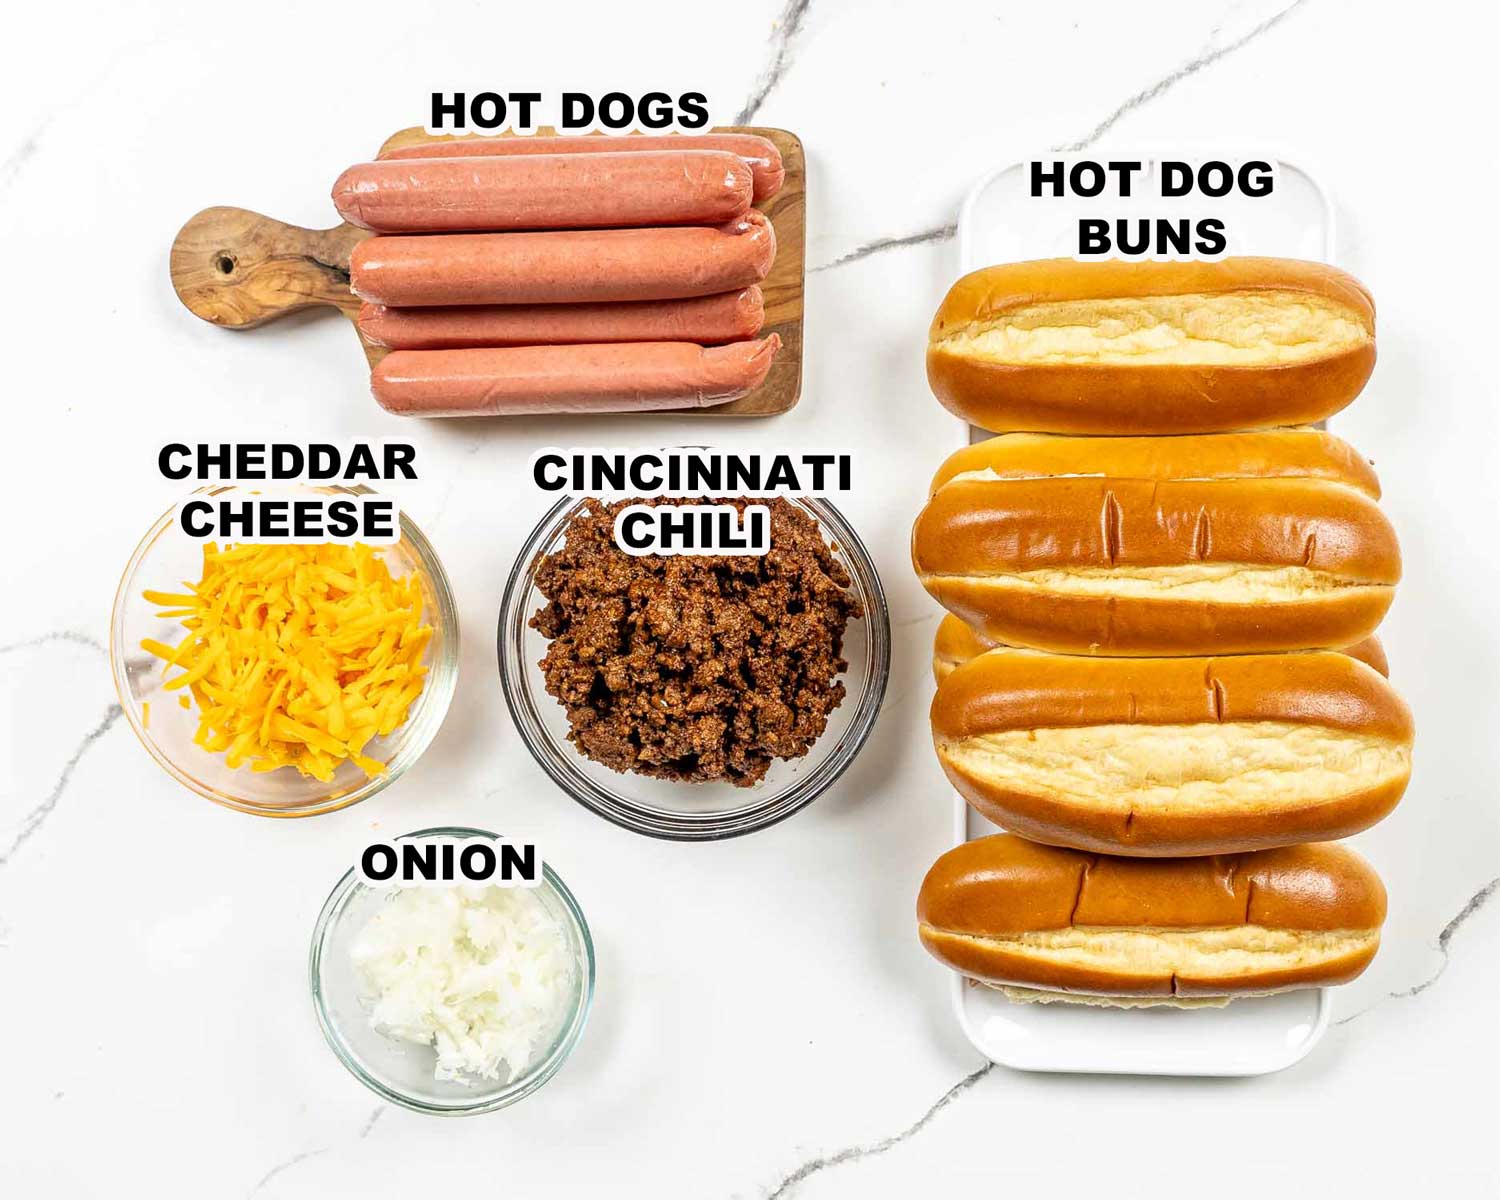 ingredients needed to make chili dogs.